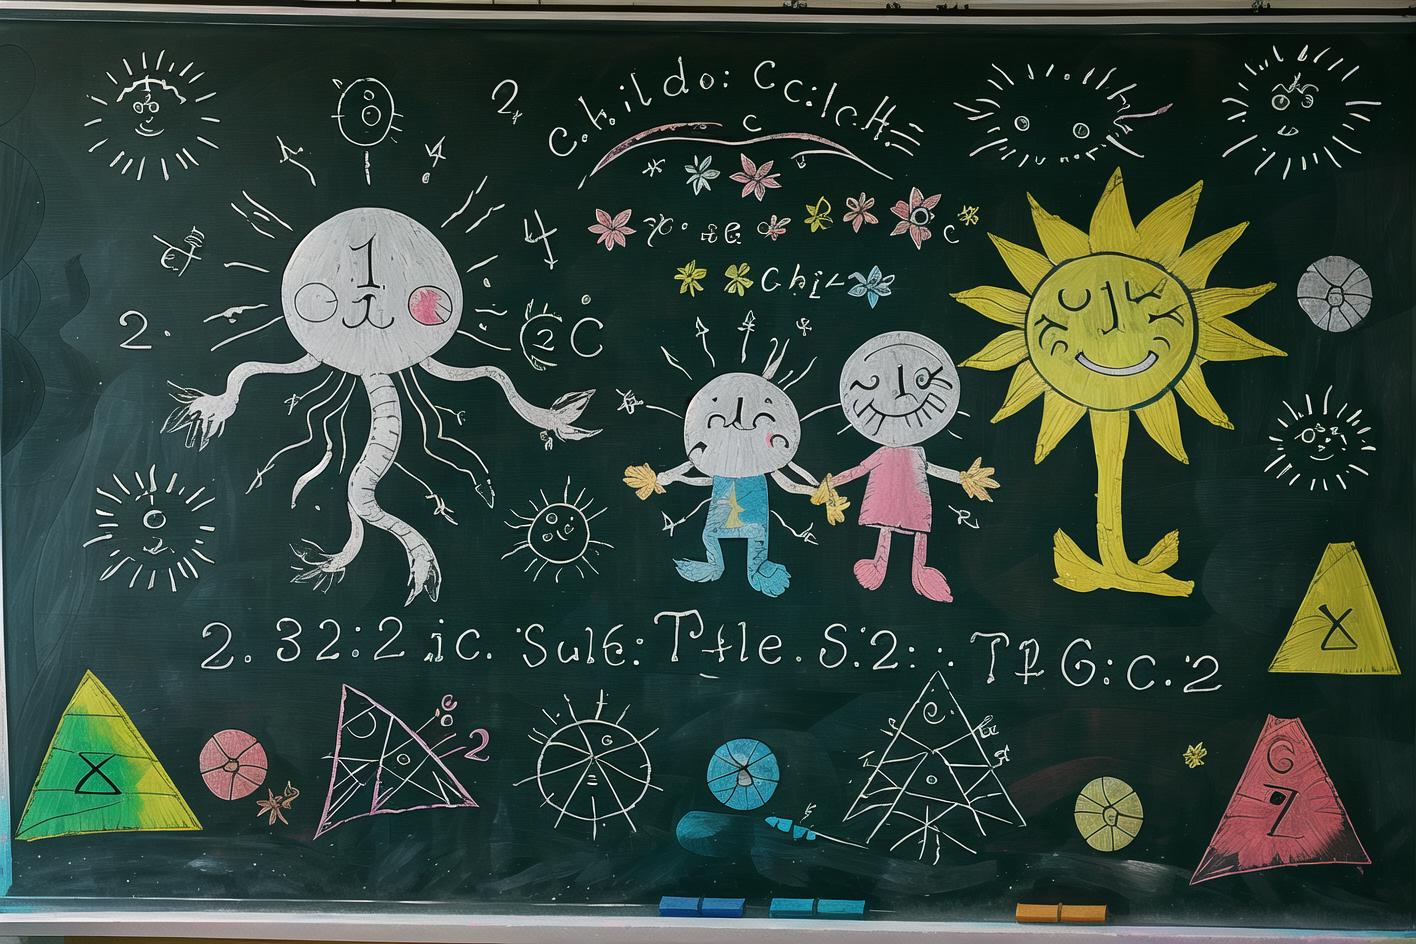 A chalkboard with various drawings, including a sun and characters, and writing.